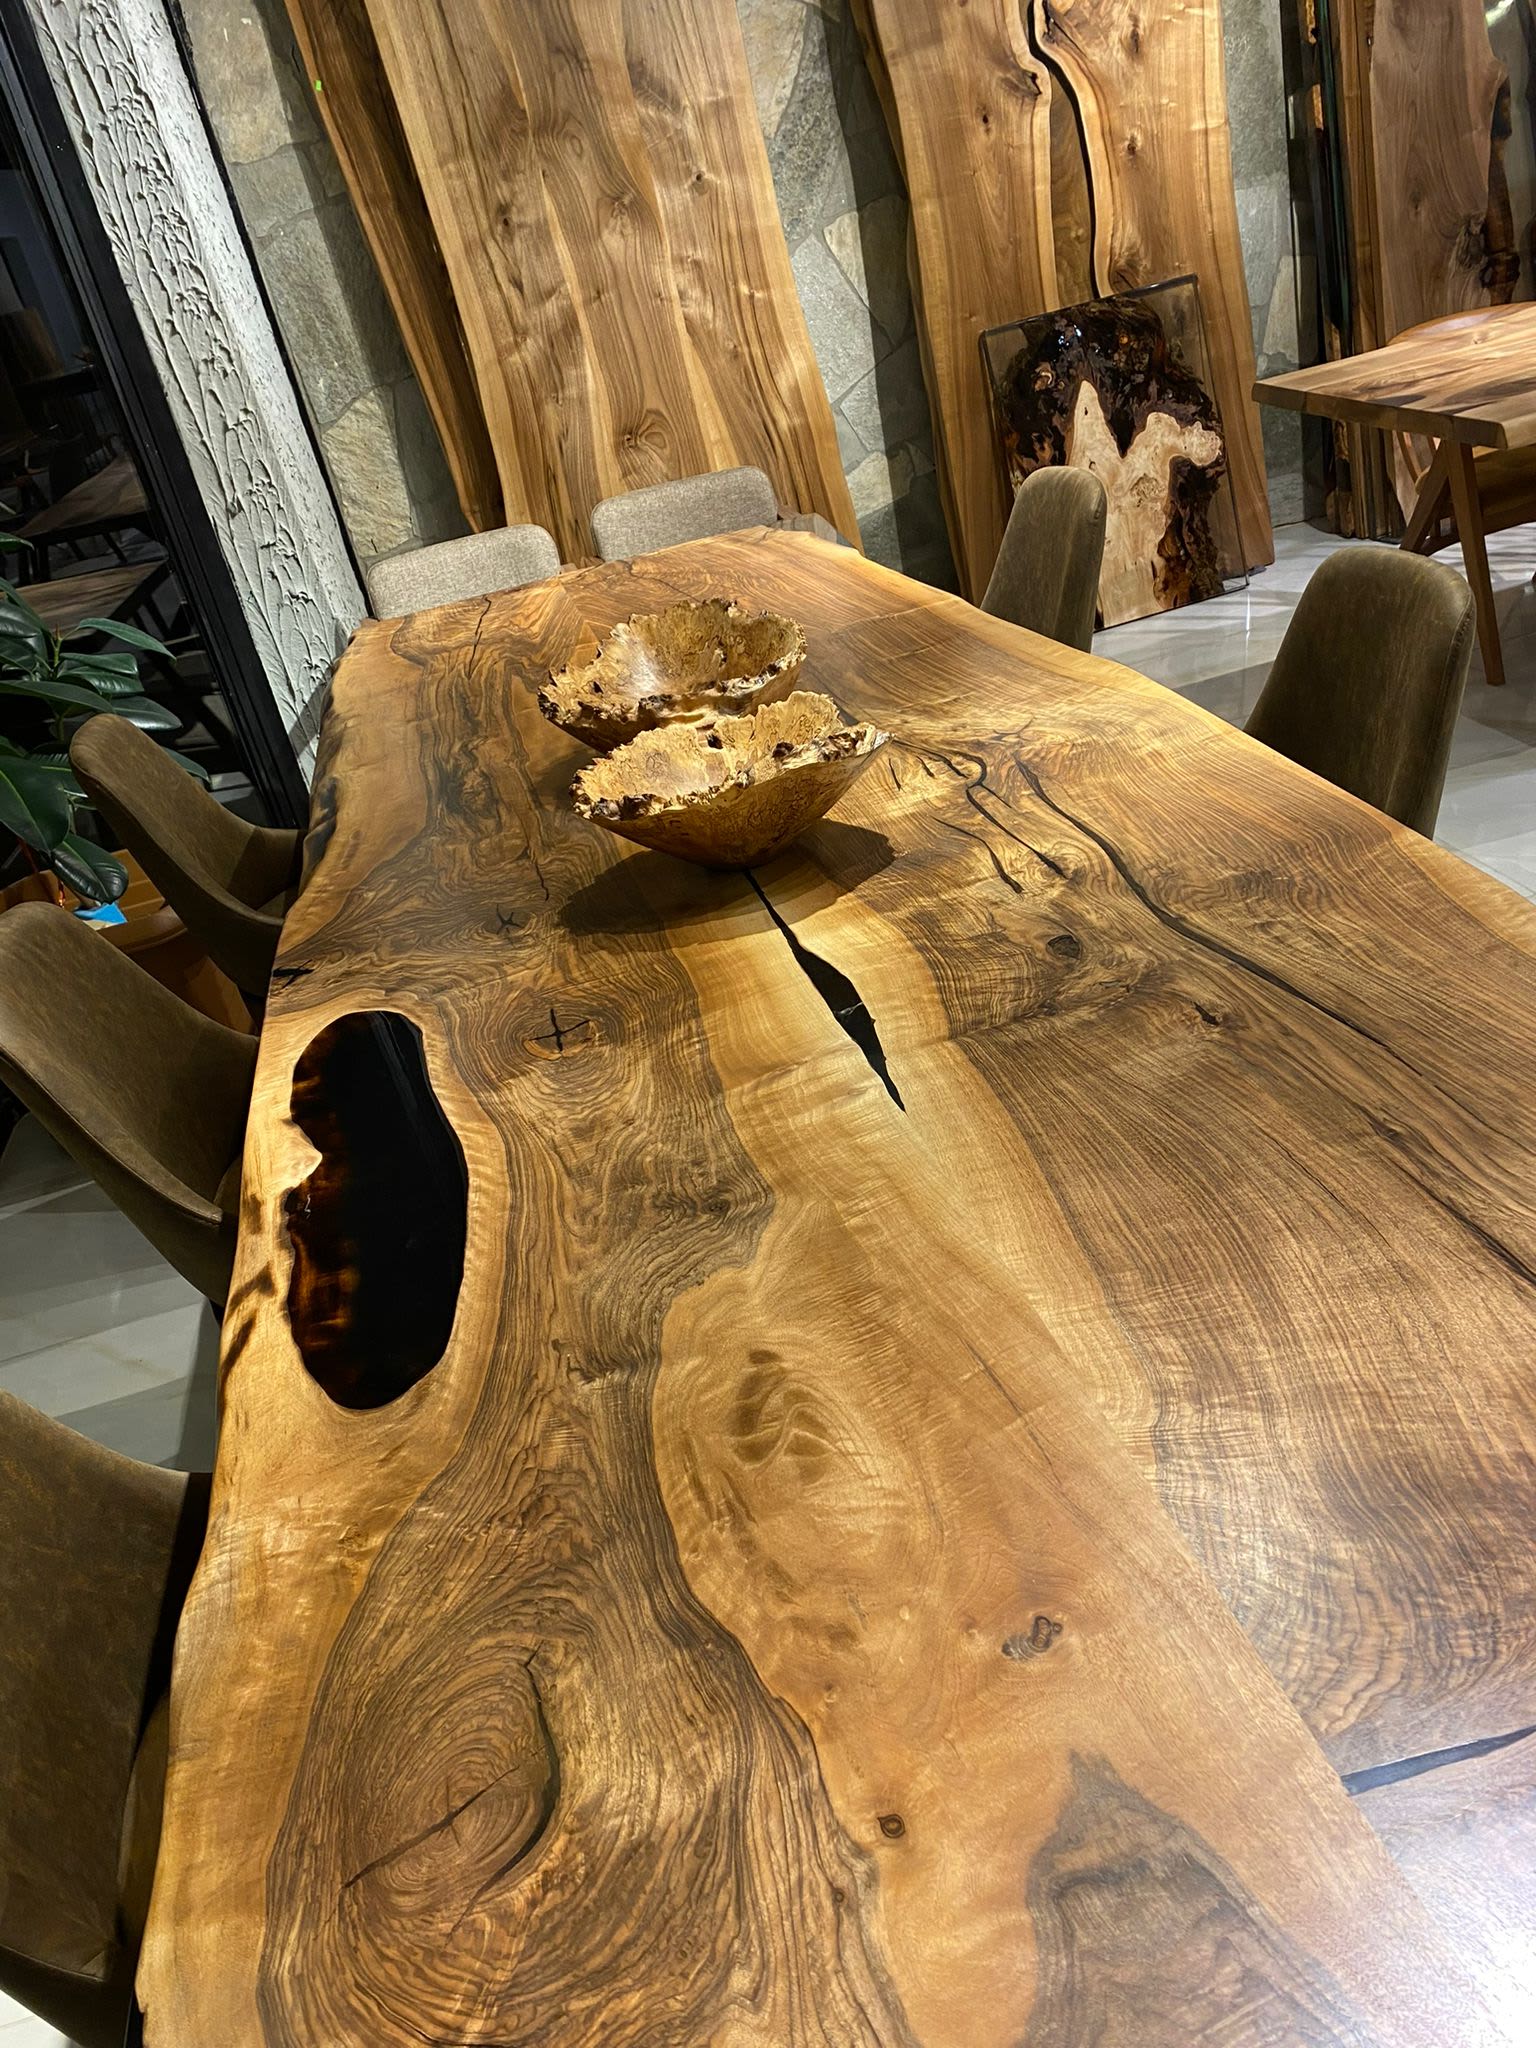 Large Dining Table 